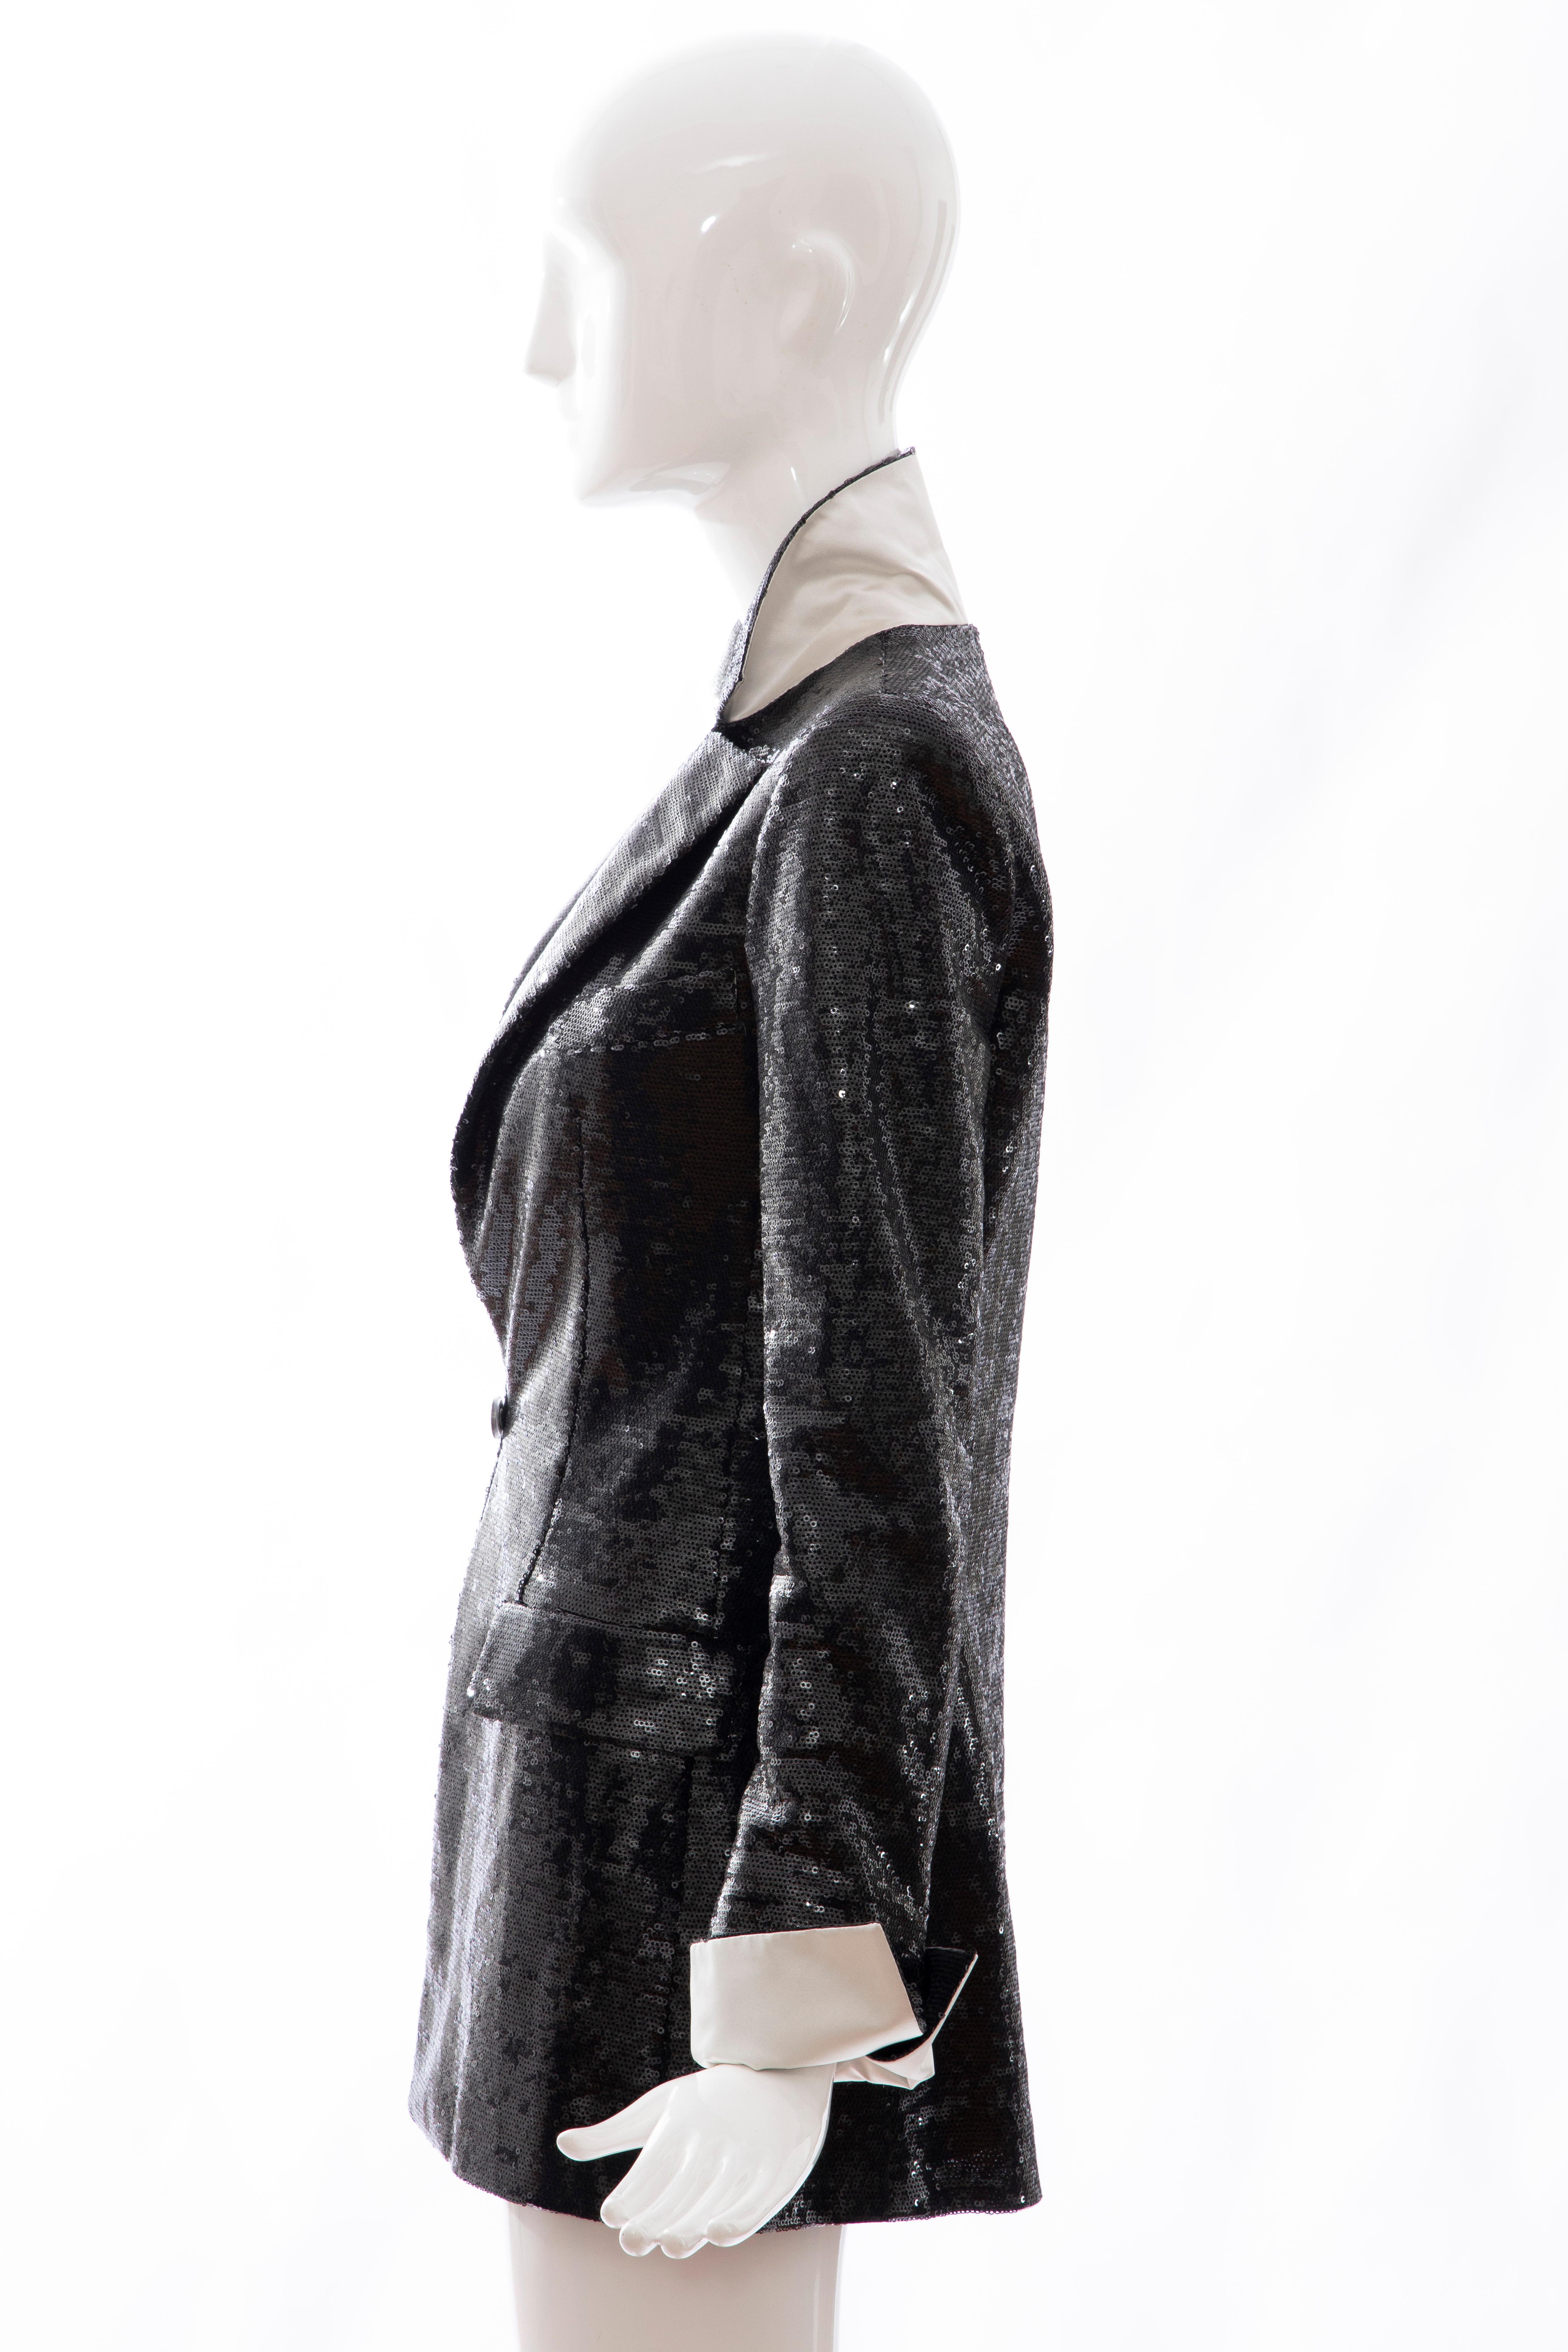 Chanel Black Embroidered Sequin Evening Jacket Ivory Silk Cuffs, Cruise 2009 For Sale 2